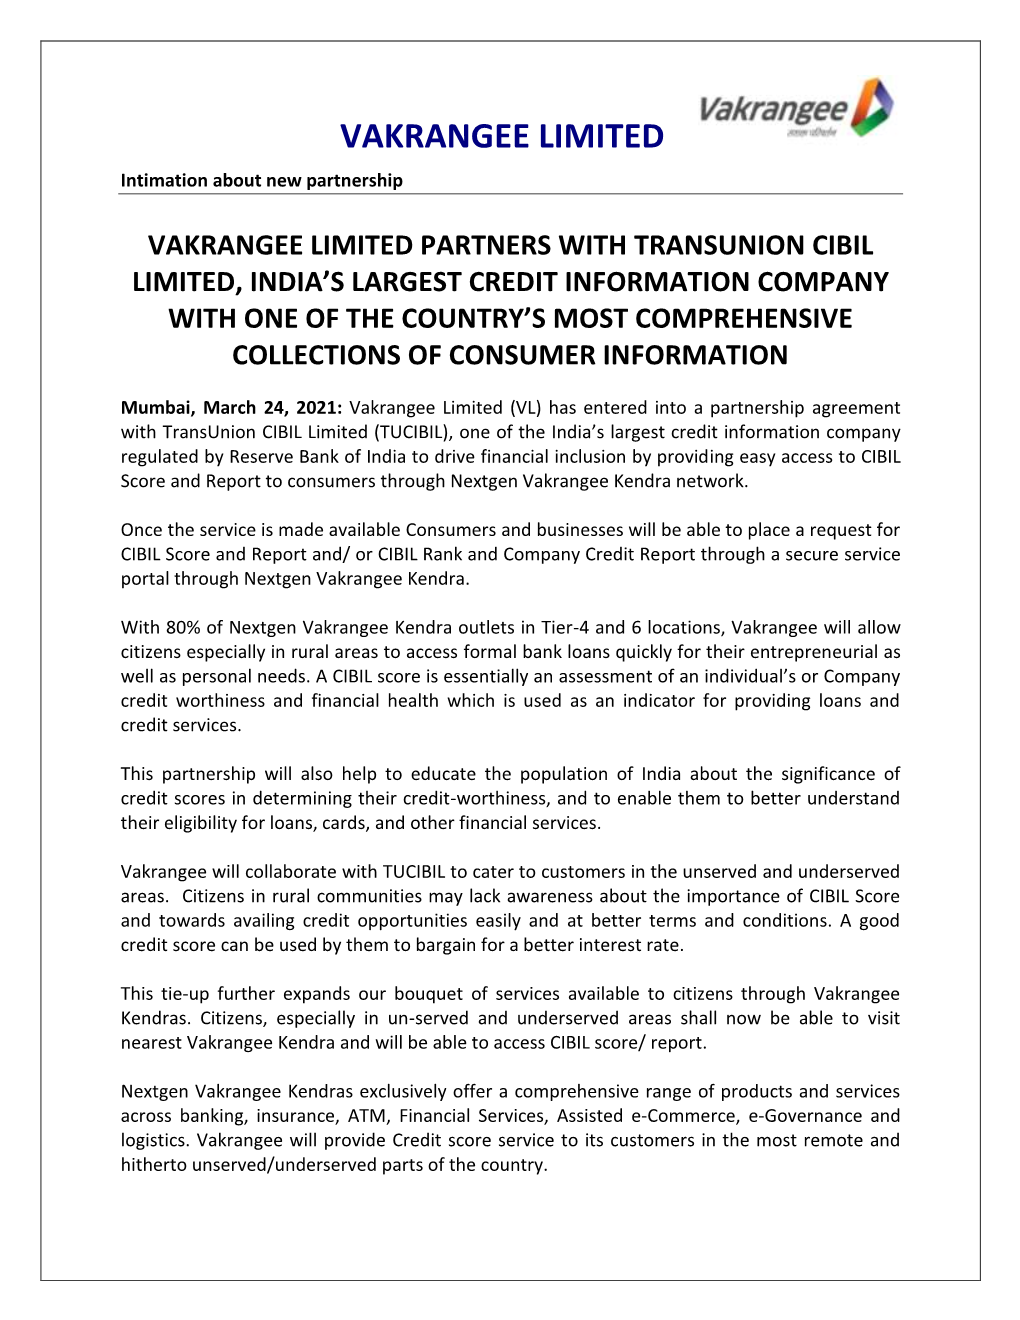 Intimation for New Partnership with Transunion CIBIL